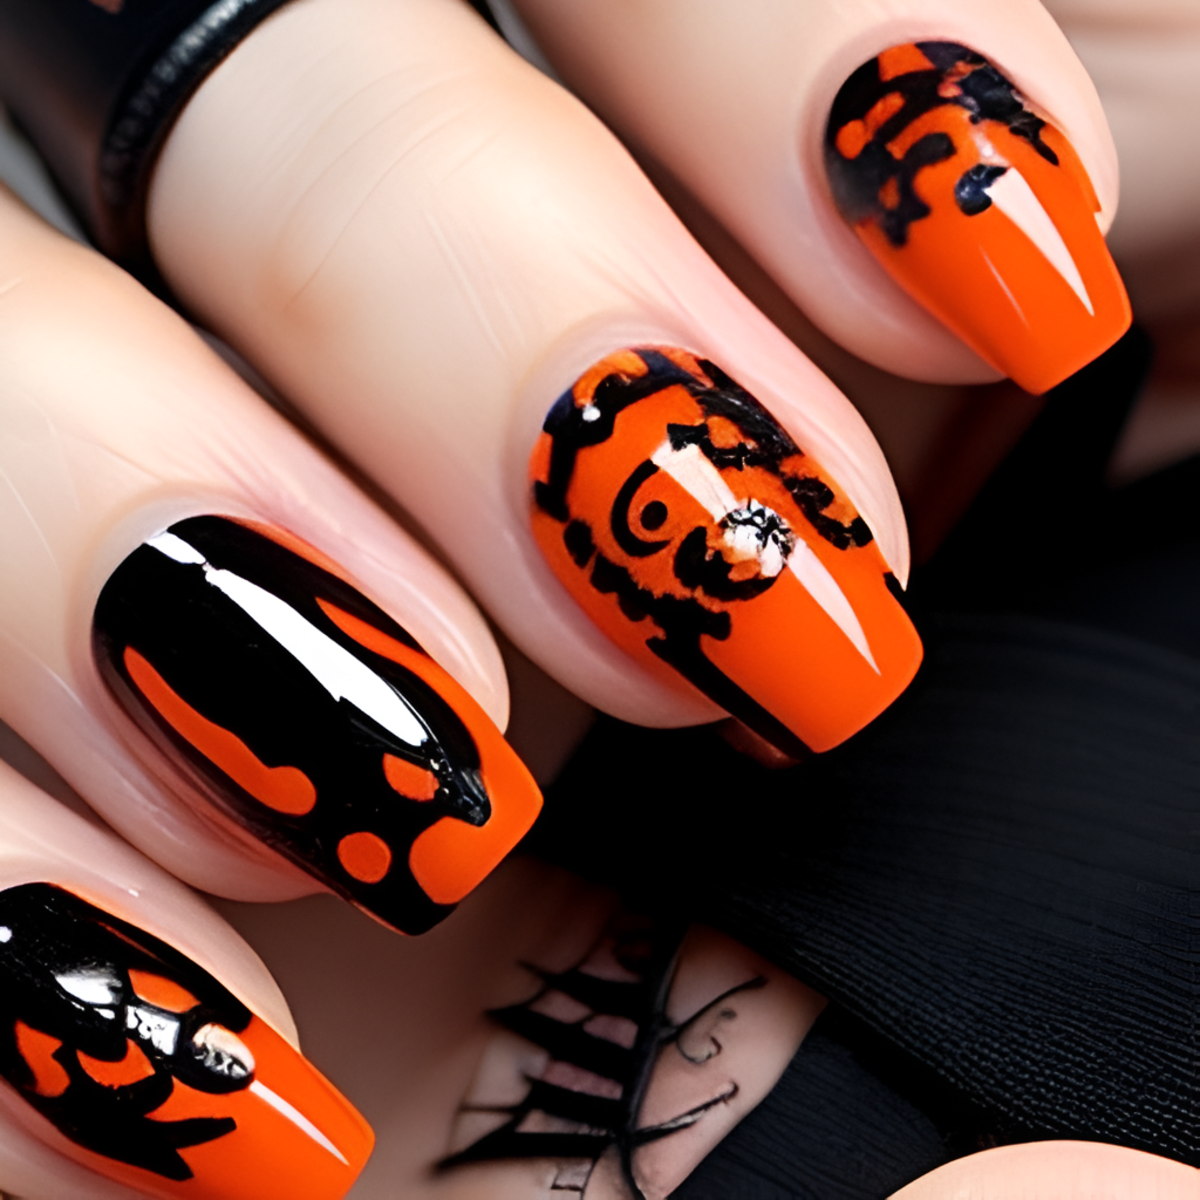 How to Nail the Halloween Look with These Amazing Nail Art Ideas